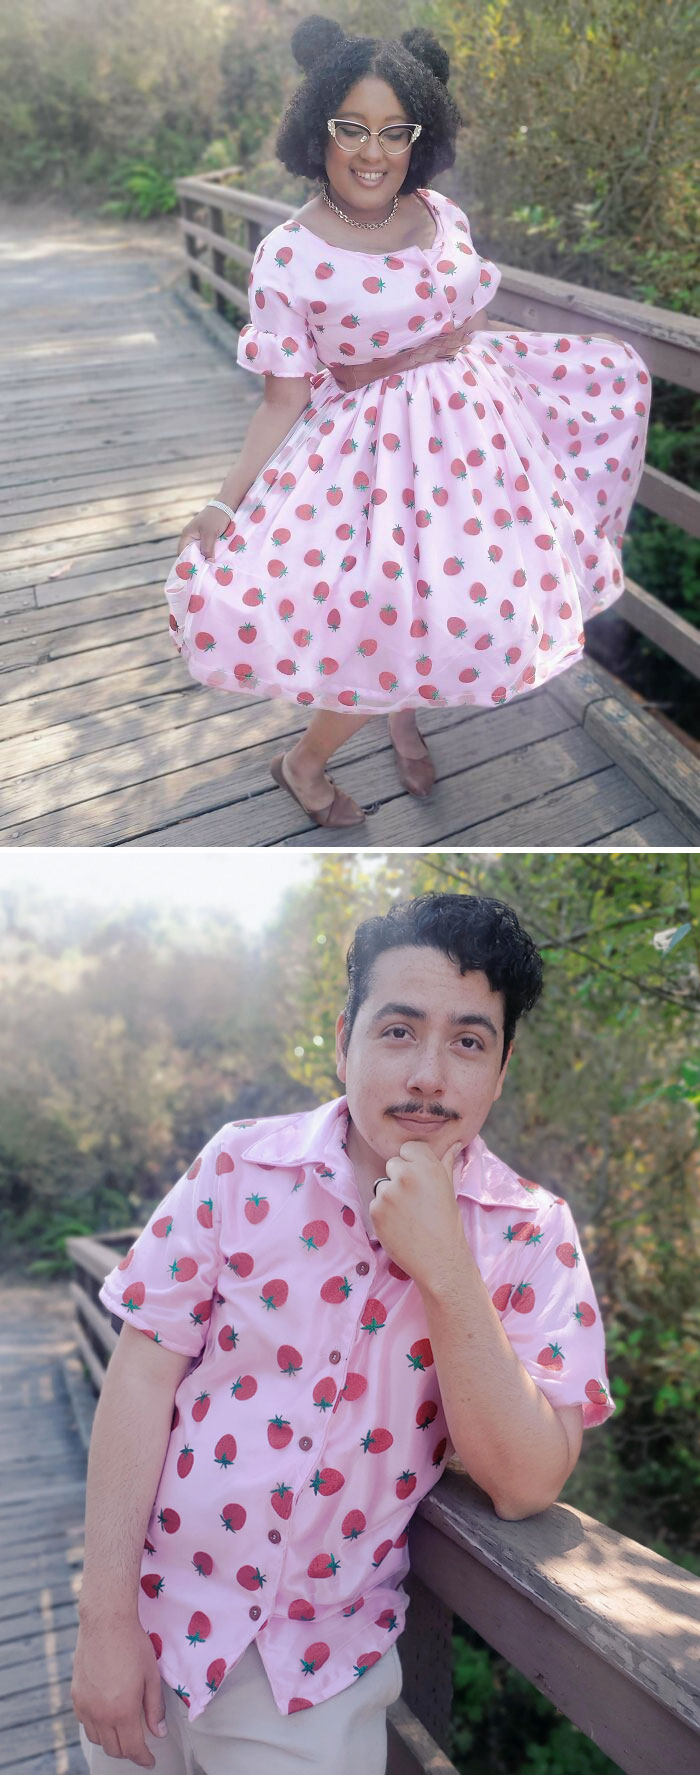 Made Myself A Strawberry Dress Of My Dreams, Along With A Matching Shirt For My Husband